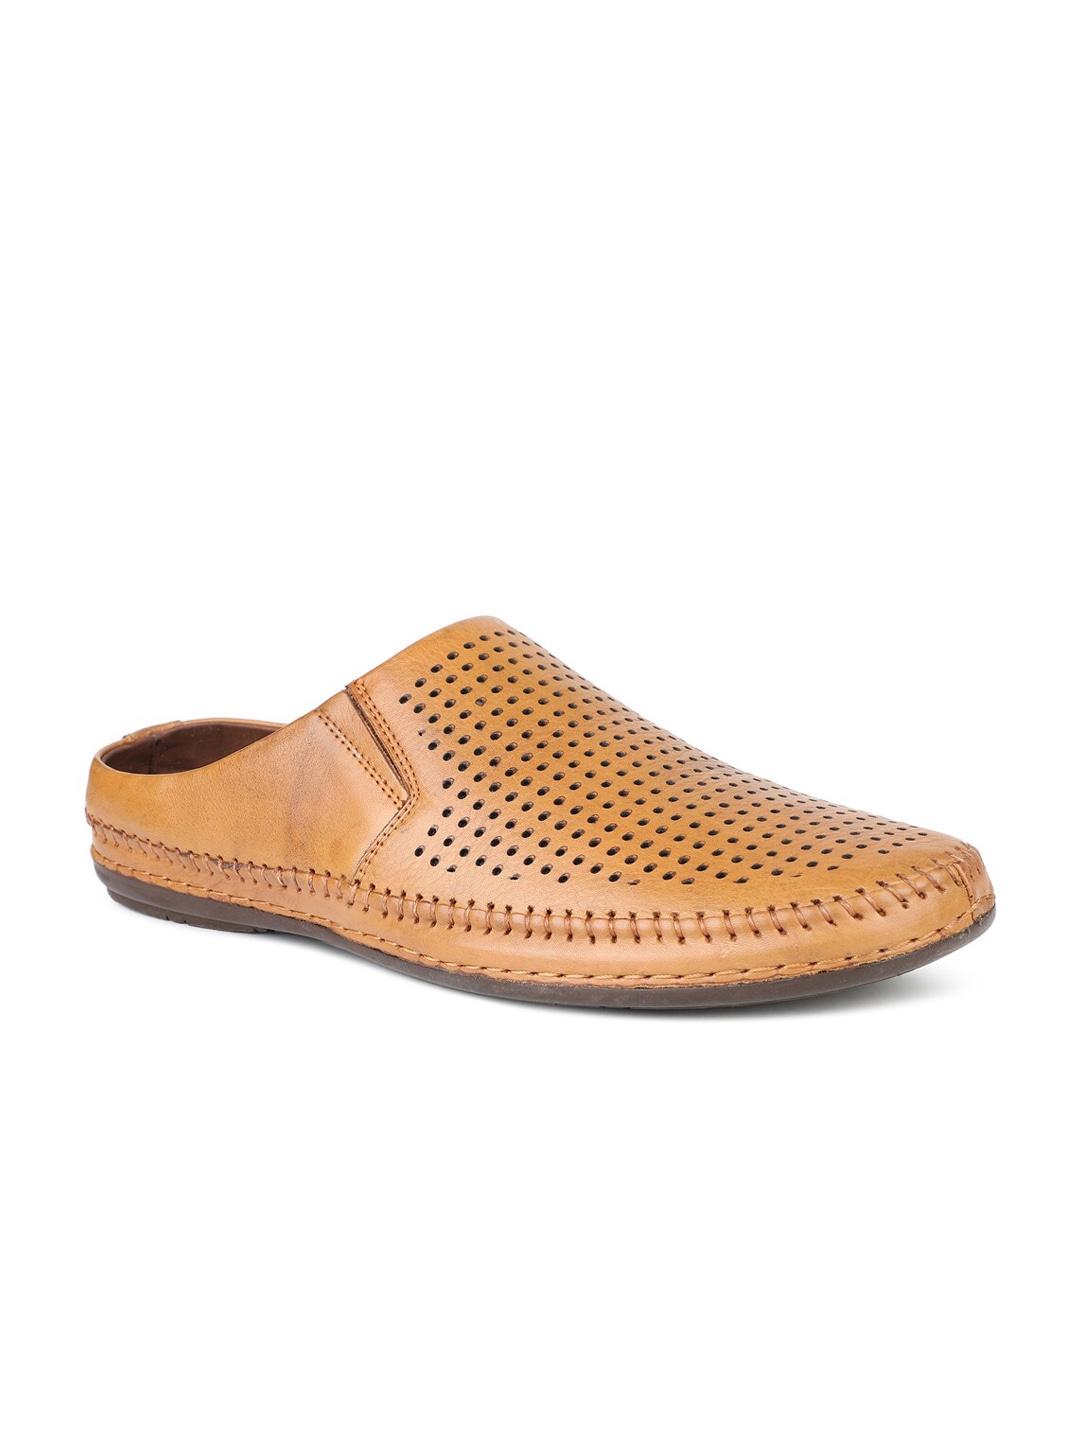 privo men perforations leather laser cuts mules